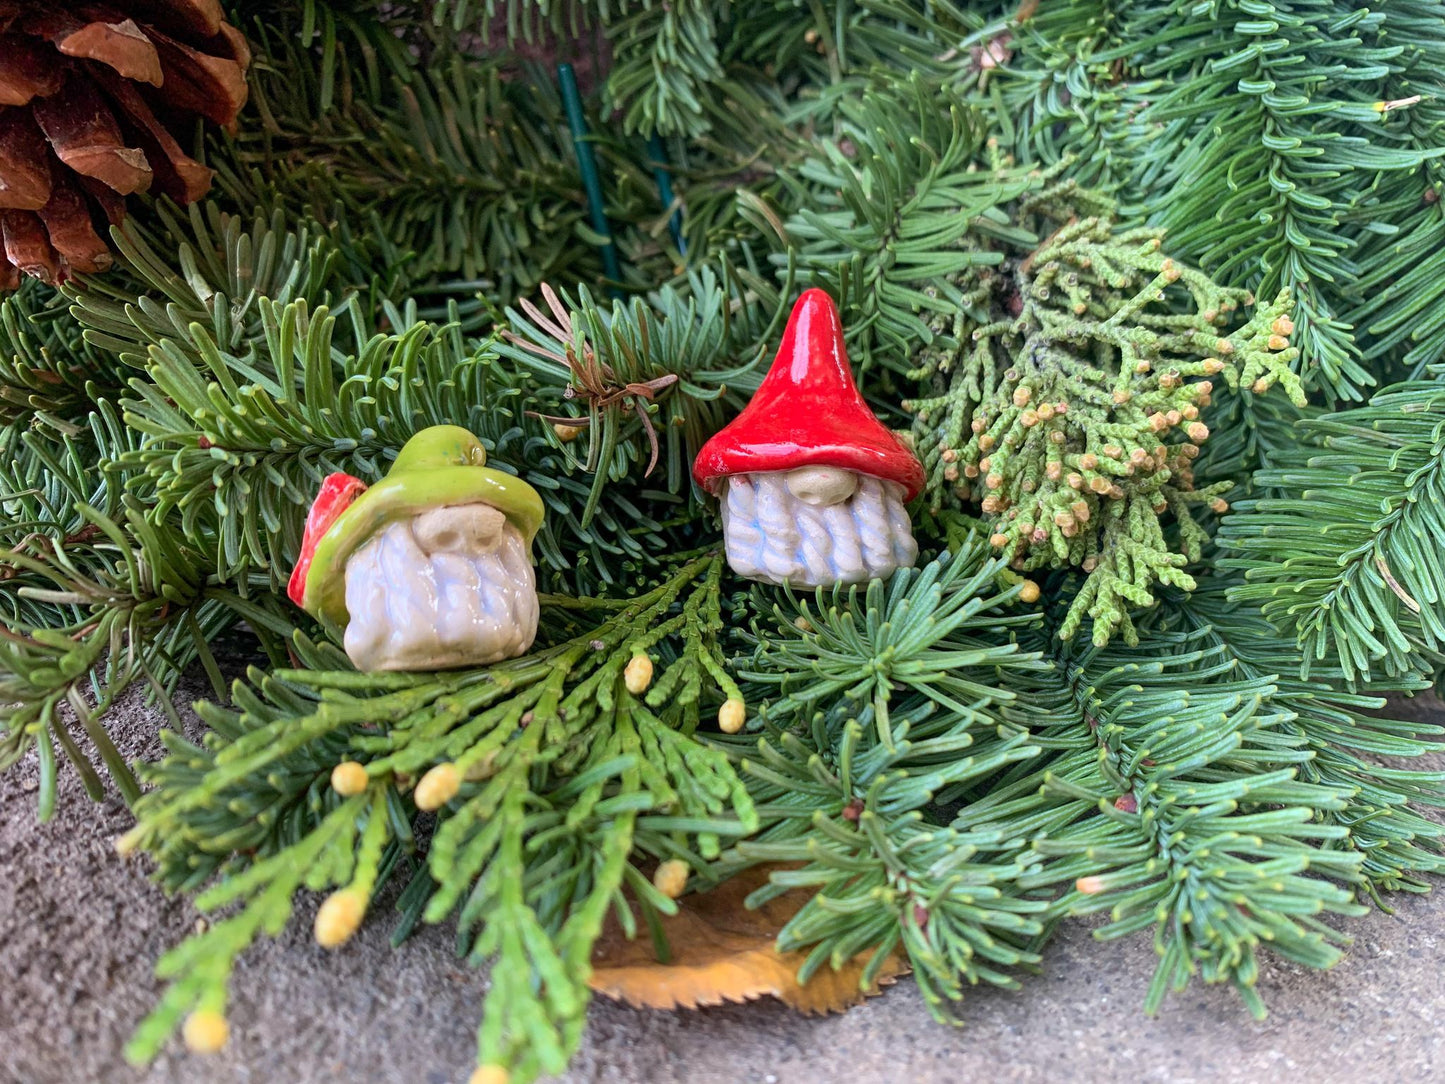 Gcomet the Red Hat Gnome